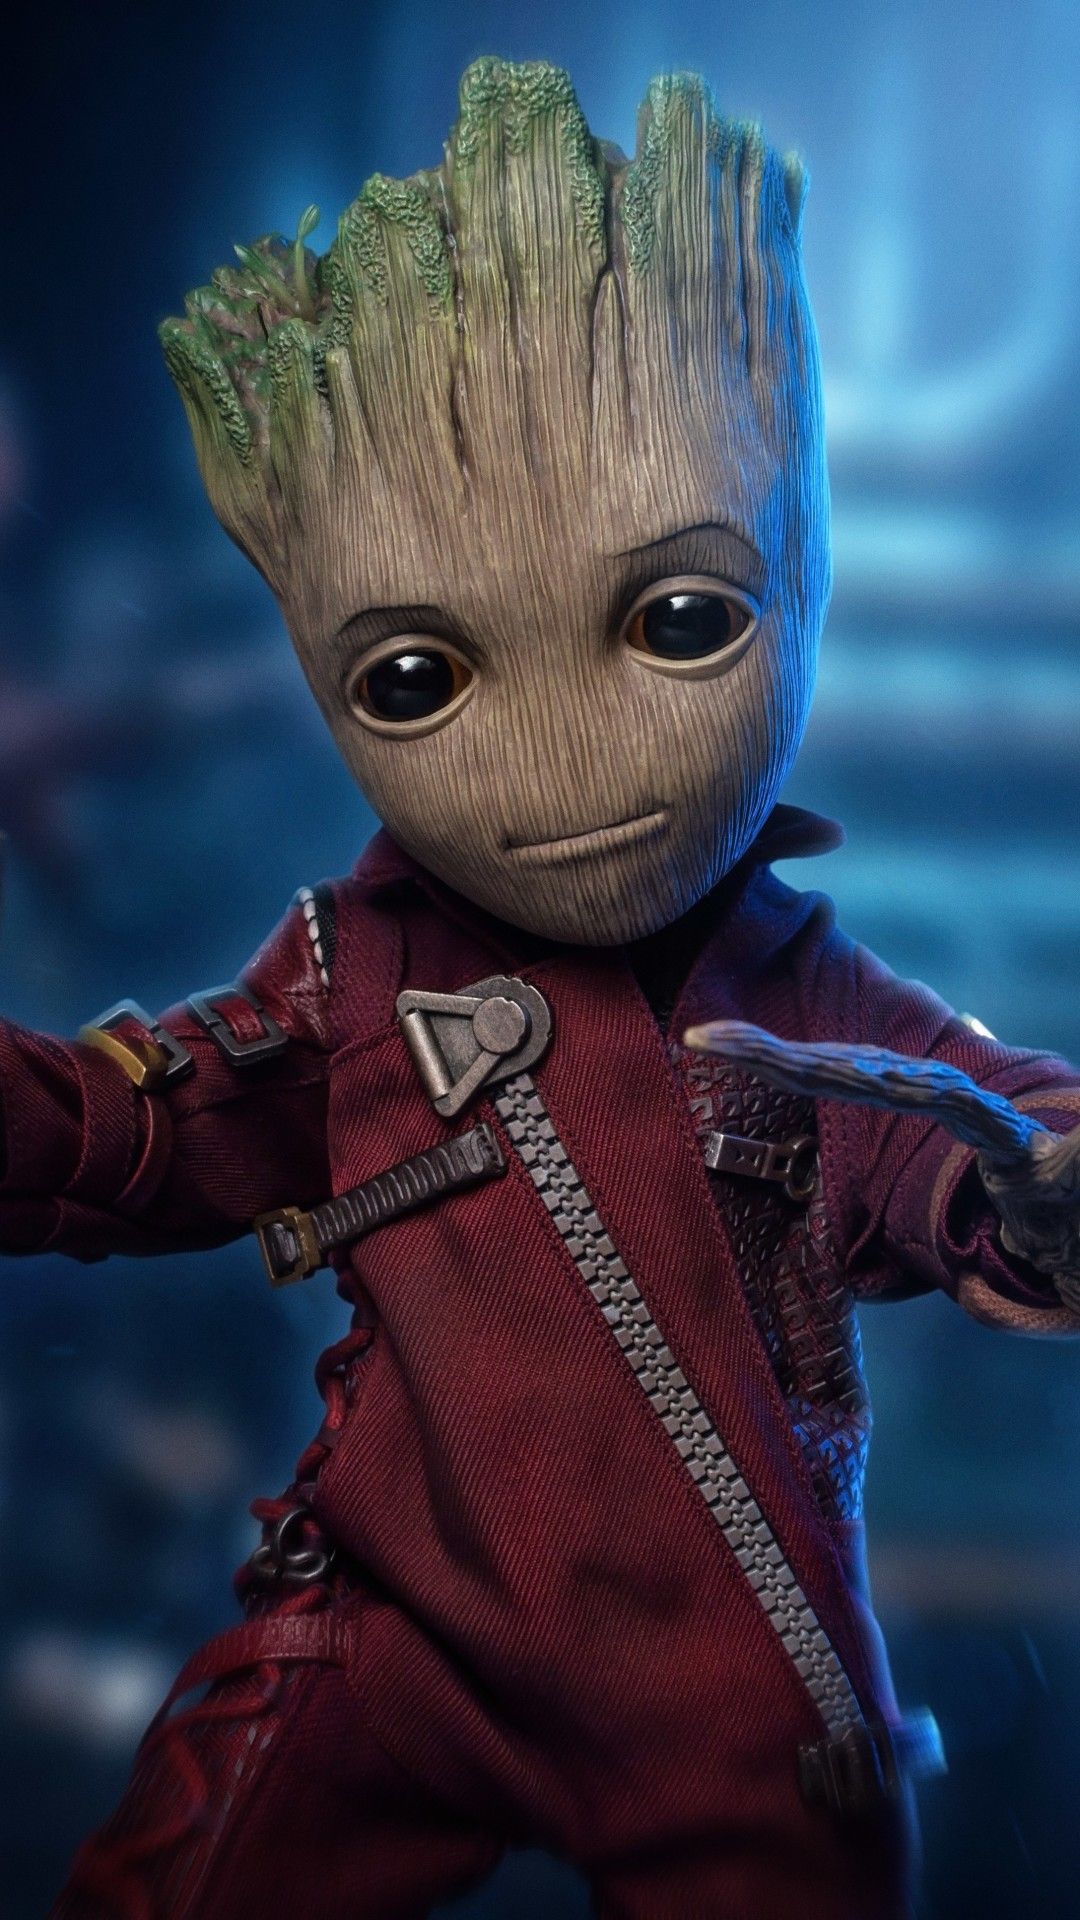 5k Baby Groot Mobile Wallpaper iPhone, Android, Samsung, Pixel